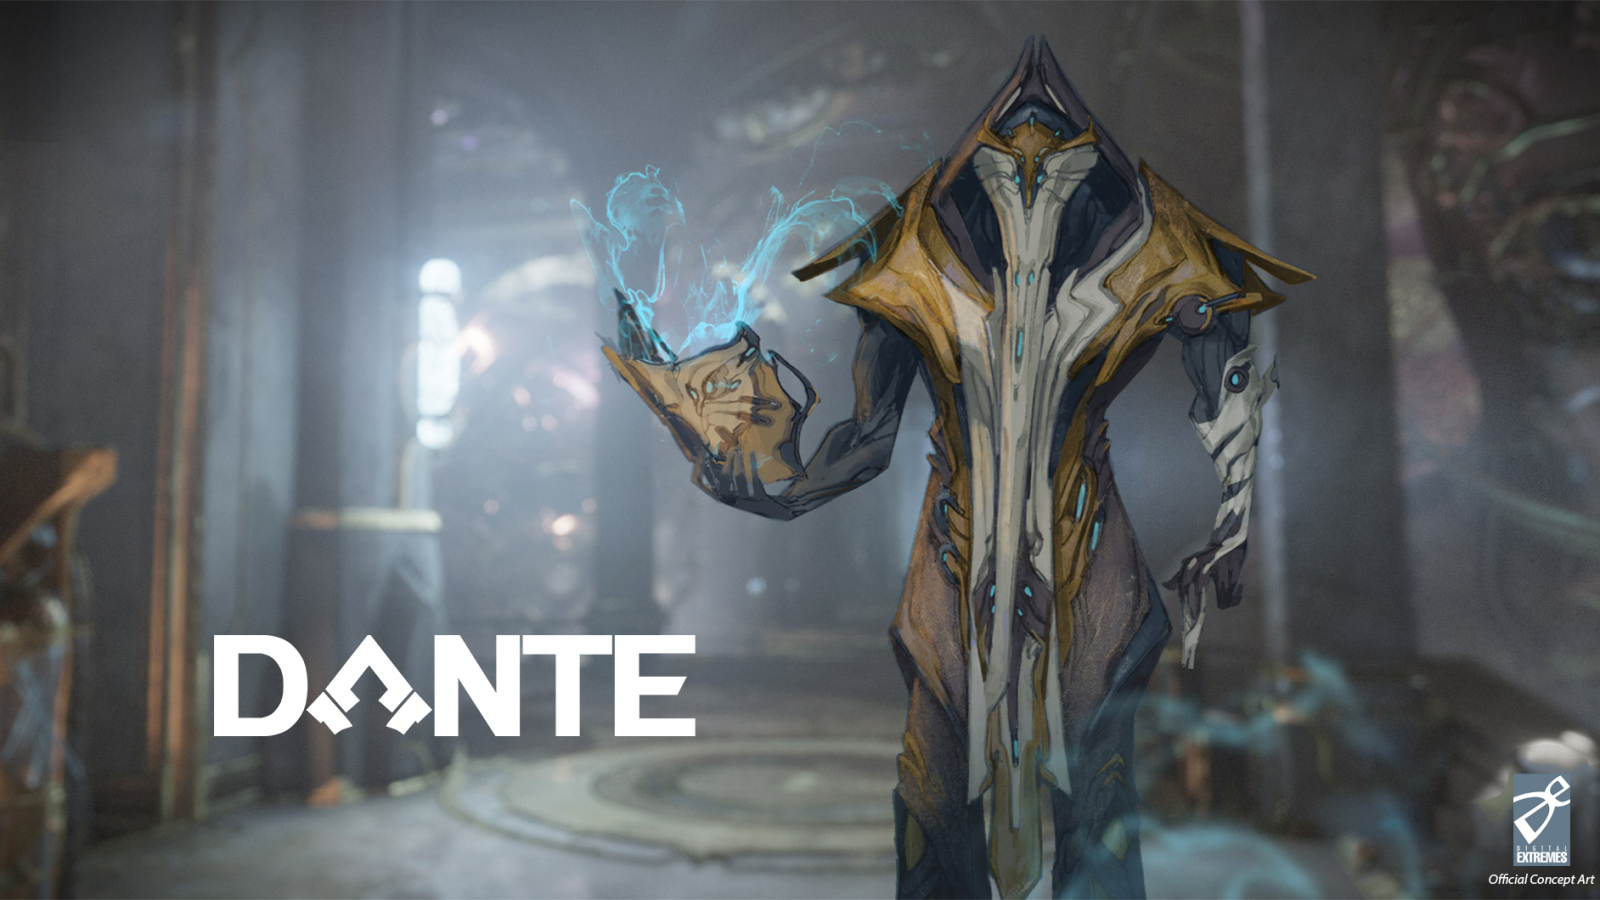 Your First Look at Dante from Dante Unbound